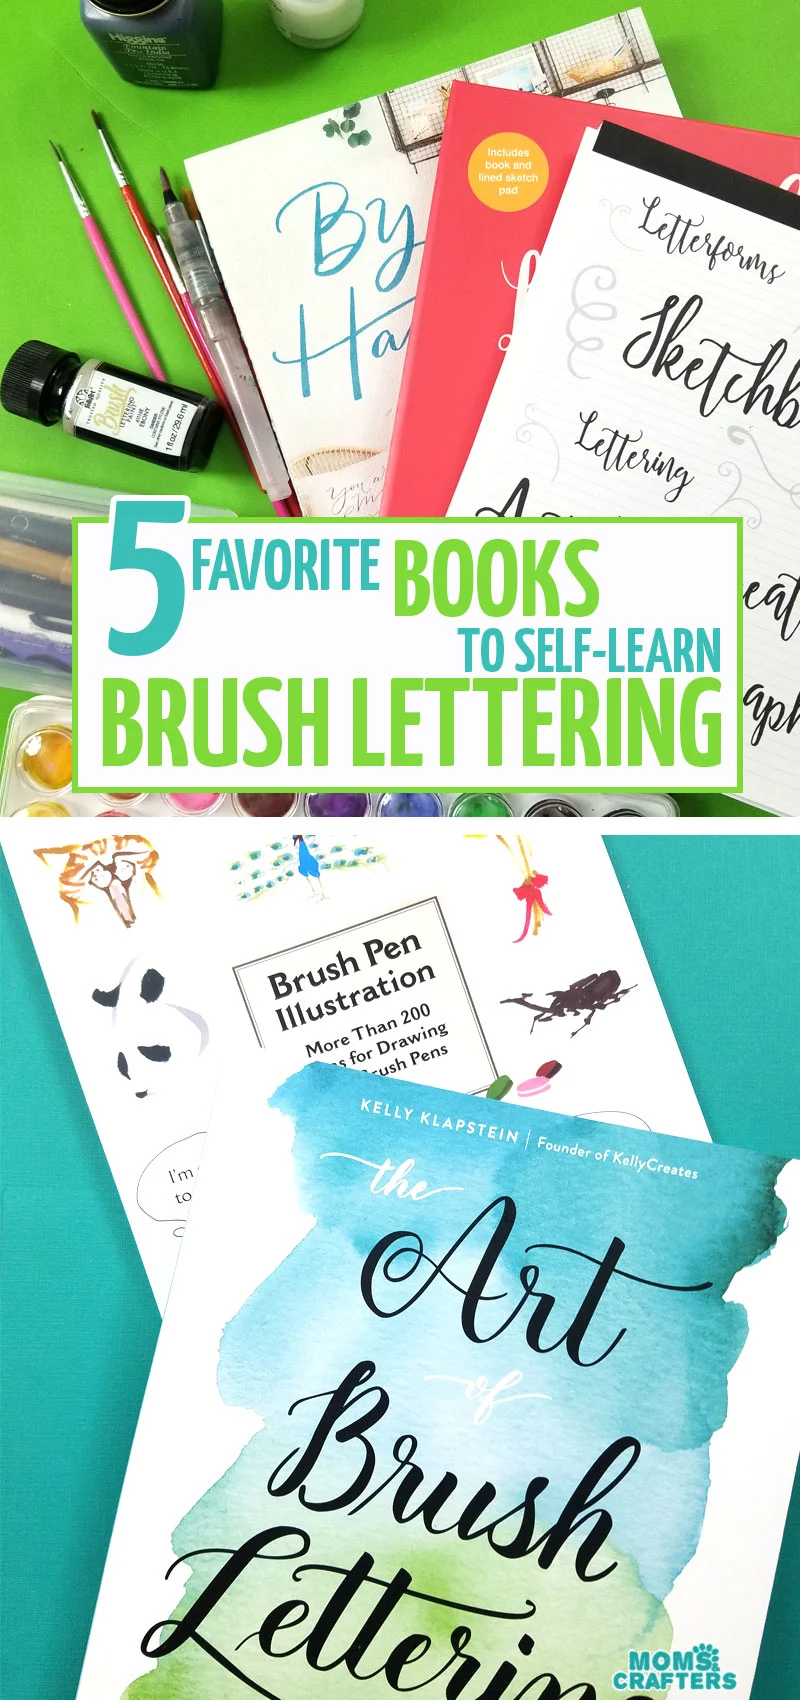 Click if you want to learn how to do brush lettering and calligraphy! I share the best brush lettering books for beginners, including practice pads and sheets #brushlettering #calligraphy #diy